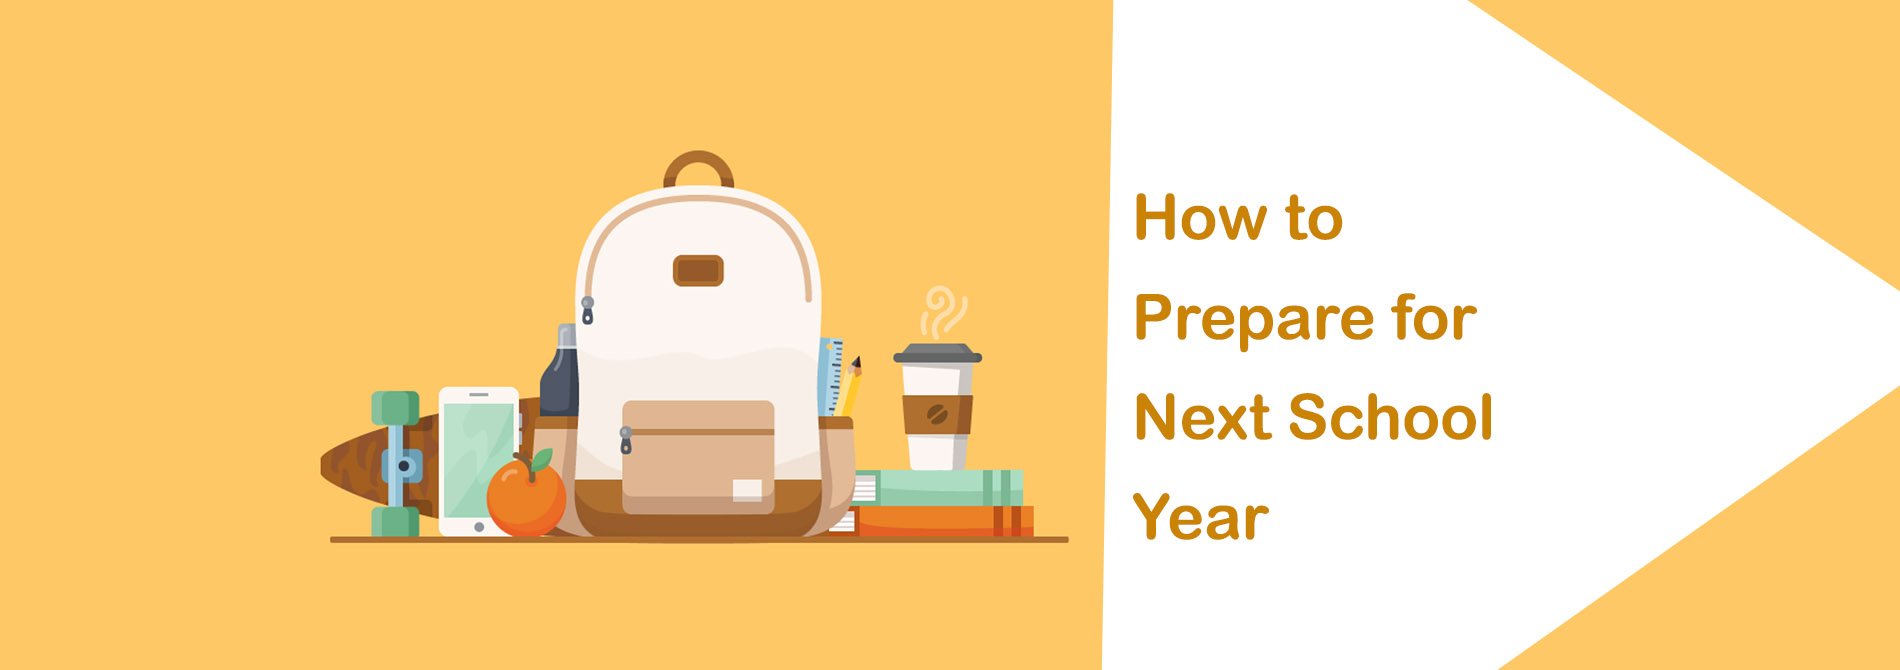 How to Prepare for Next School Year 2019